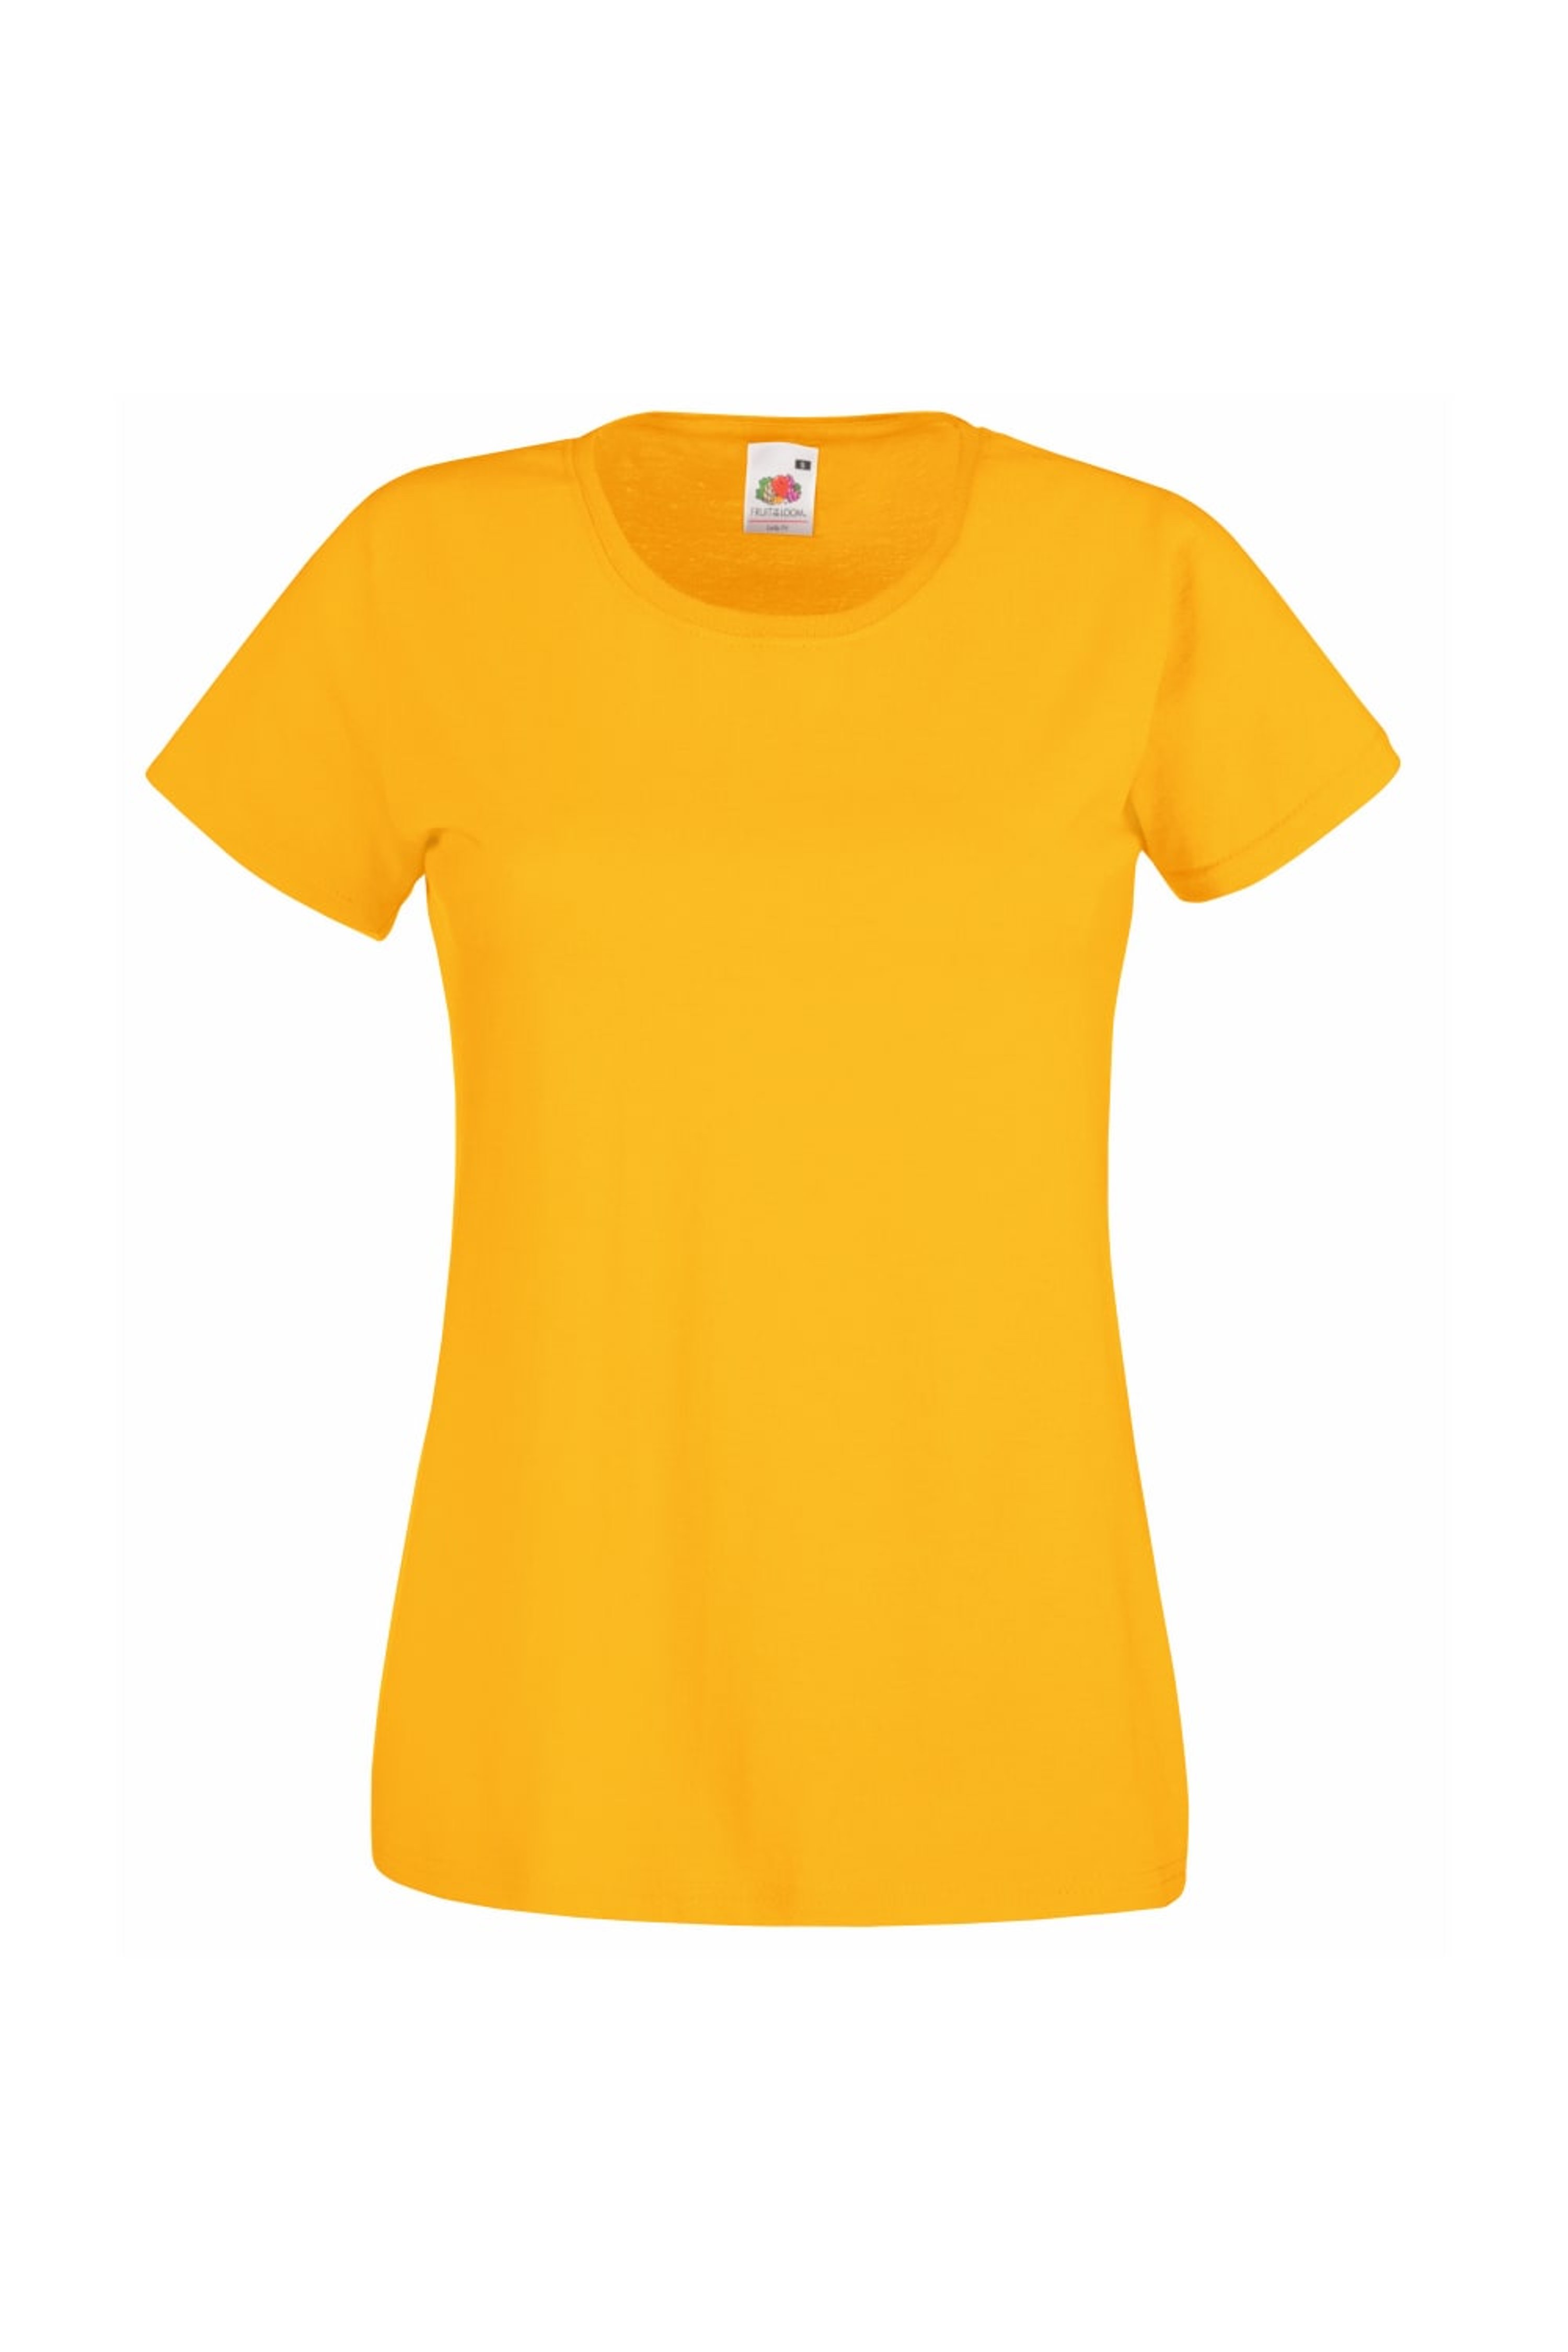 FRUIT OF THE LOOM FRUIT OF THE LOOM FRUIT OF THE LOOM LADIES/WOMENS LADY-FIT VALUEWEIGHT SHORT SLEEVE T-SHIRT (PACK (S